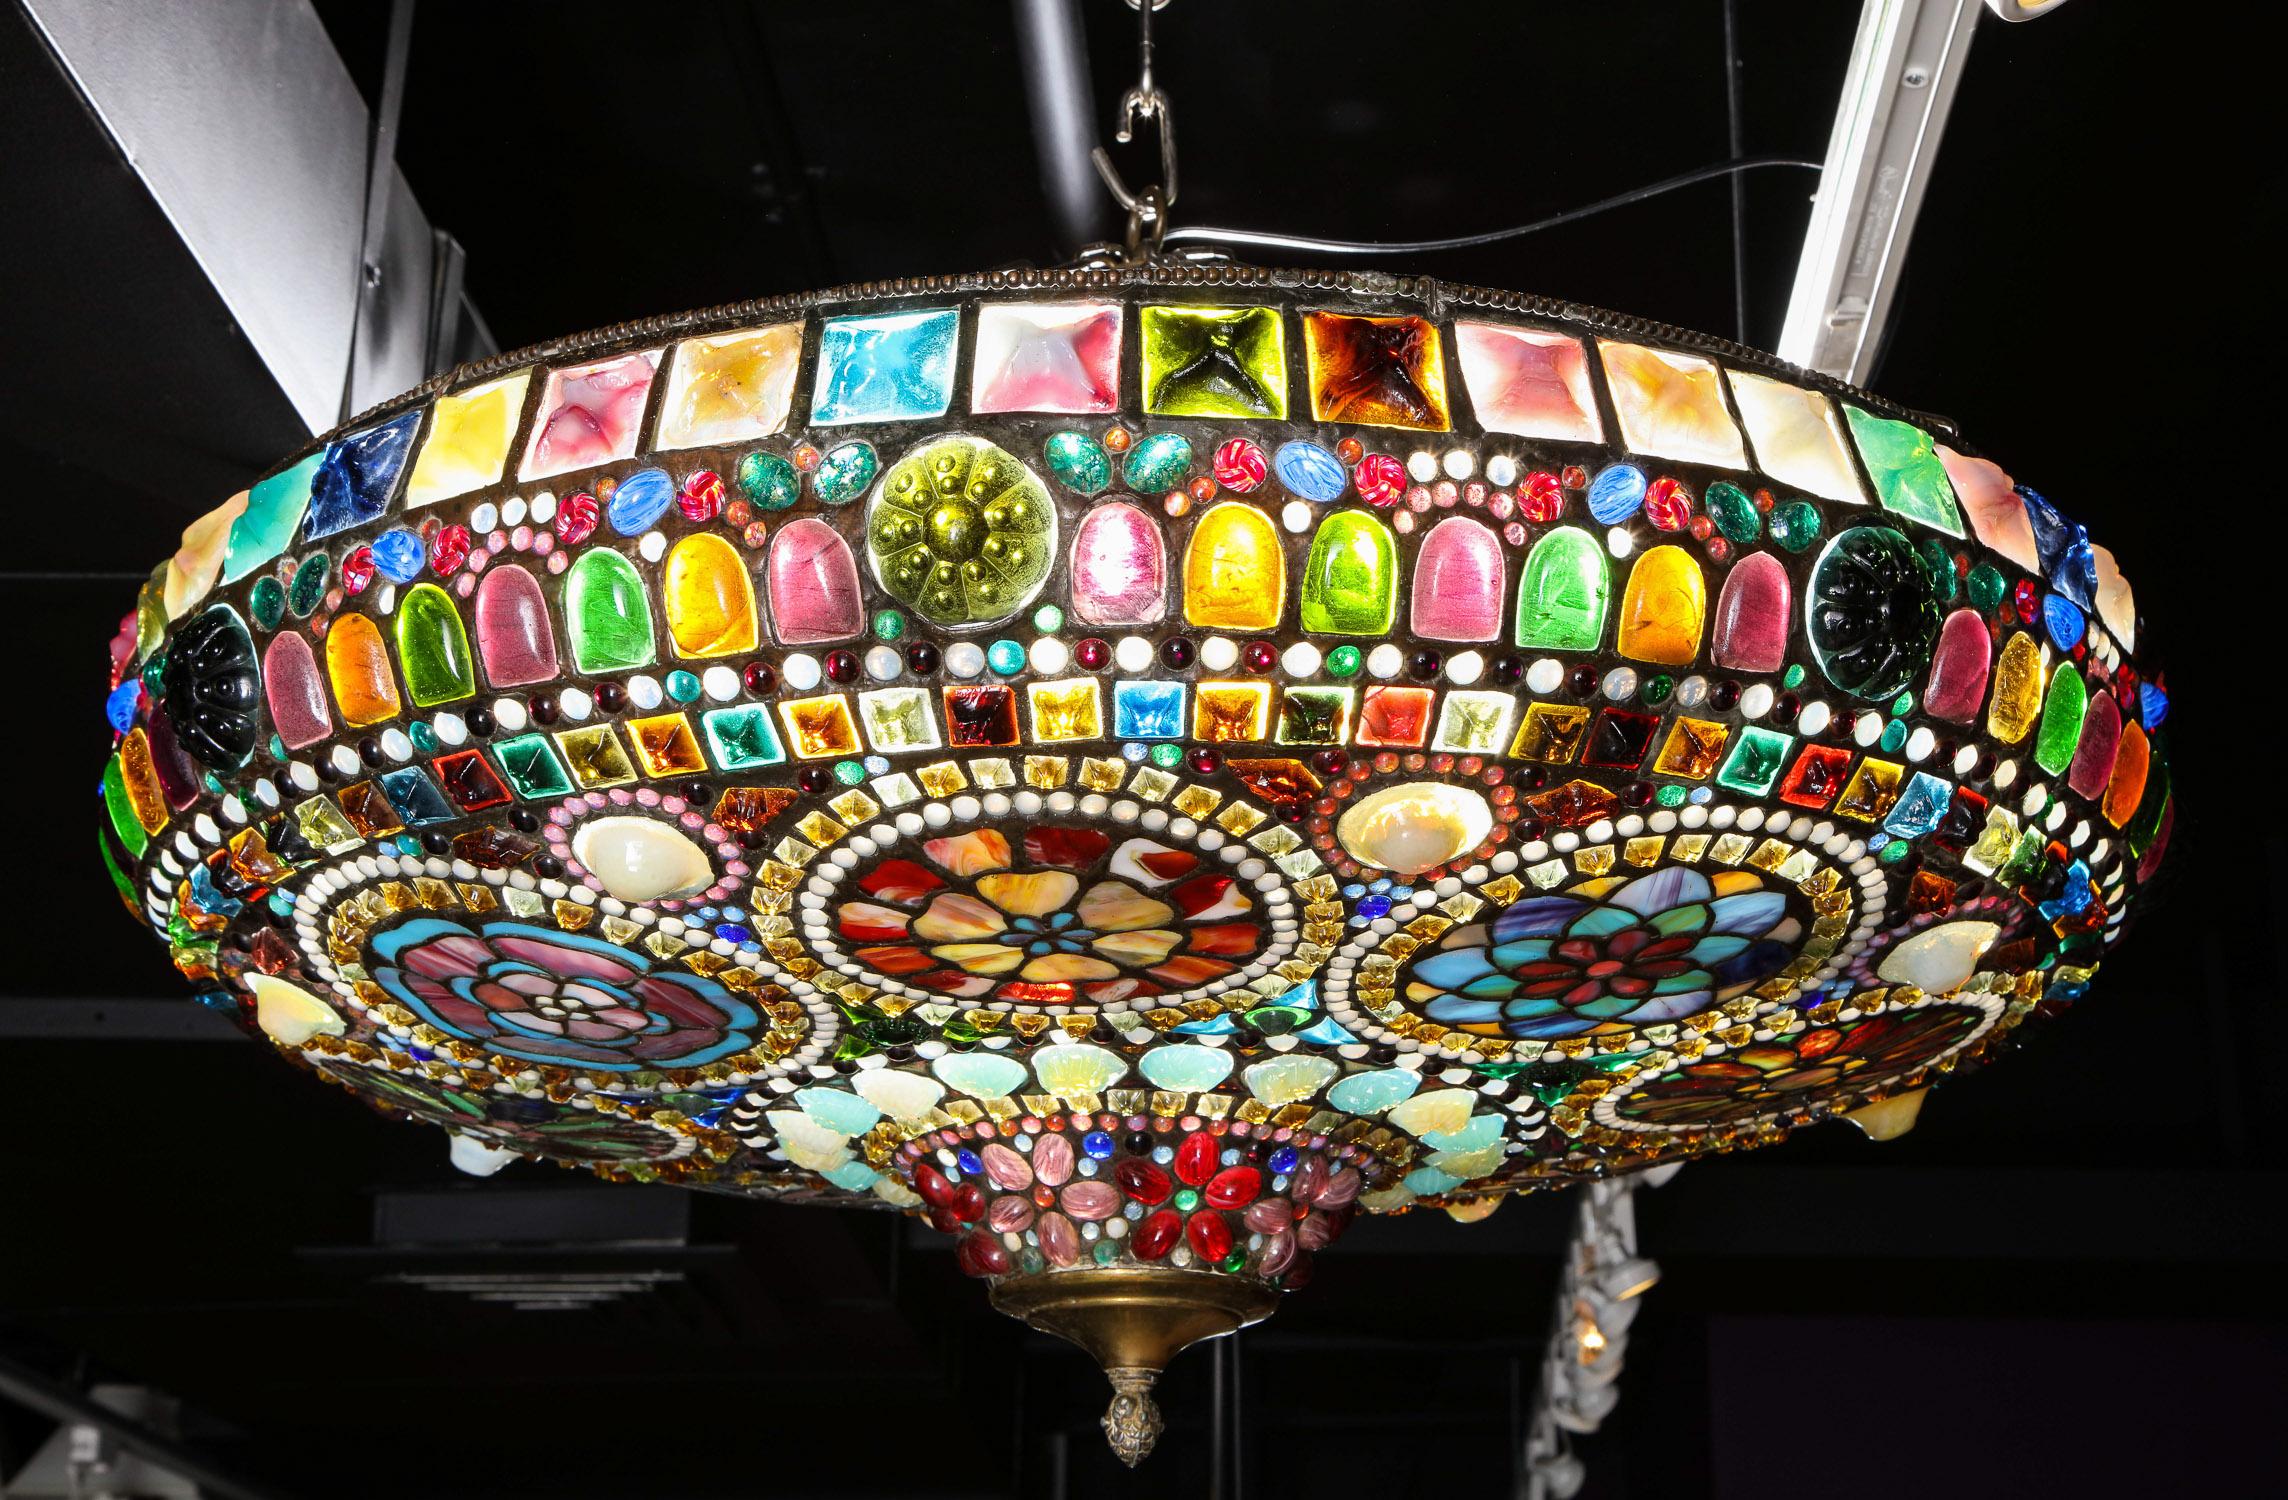 Magnificent stained Tiffany leaded glass ceiling chandelier mount, circa 1960,

This gorgeous circular leaded glass ceiling lamp is crafted from Tiffany Studios workshop glass, including square frogs' back jewels, opalescent glass, and marbleized